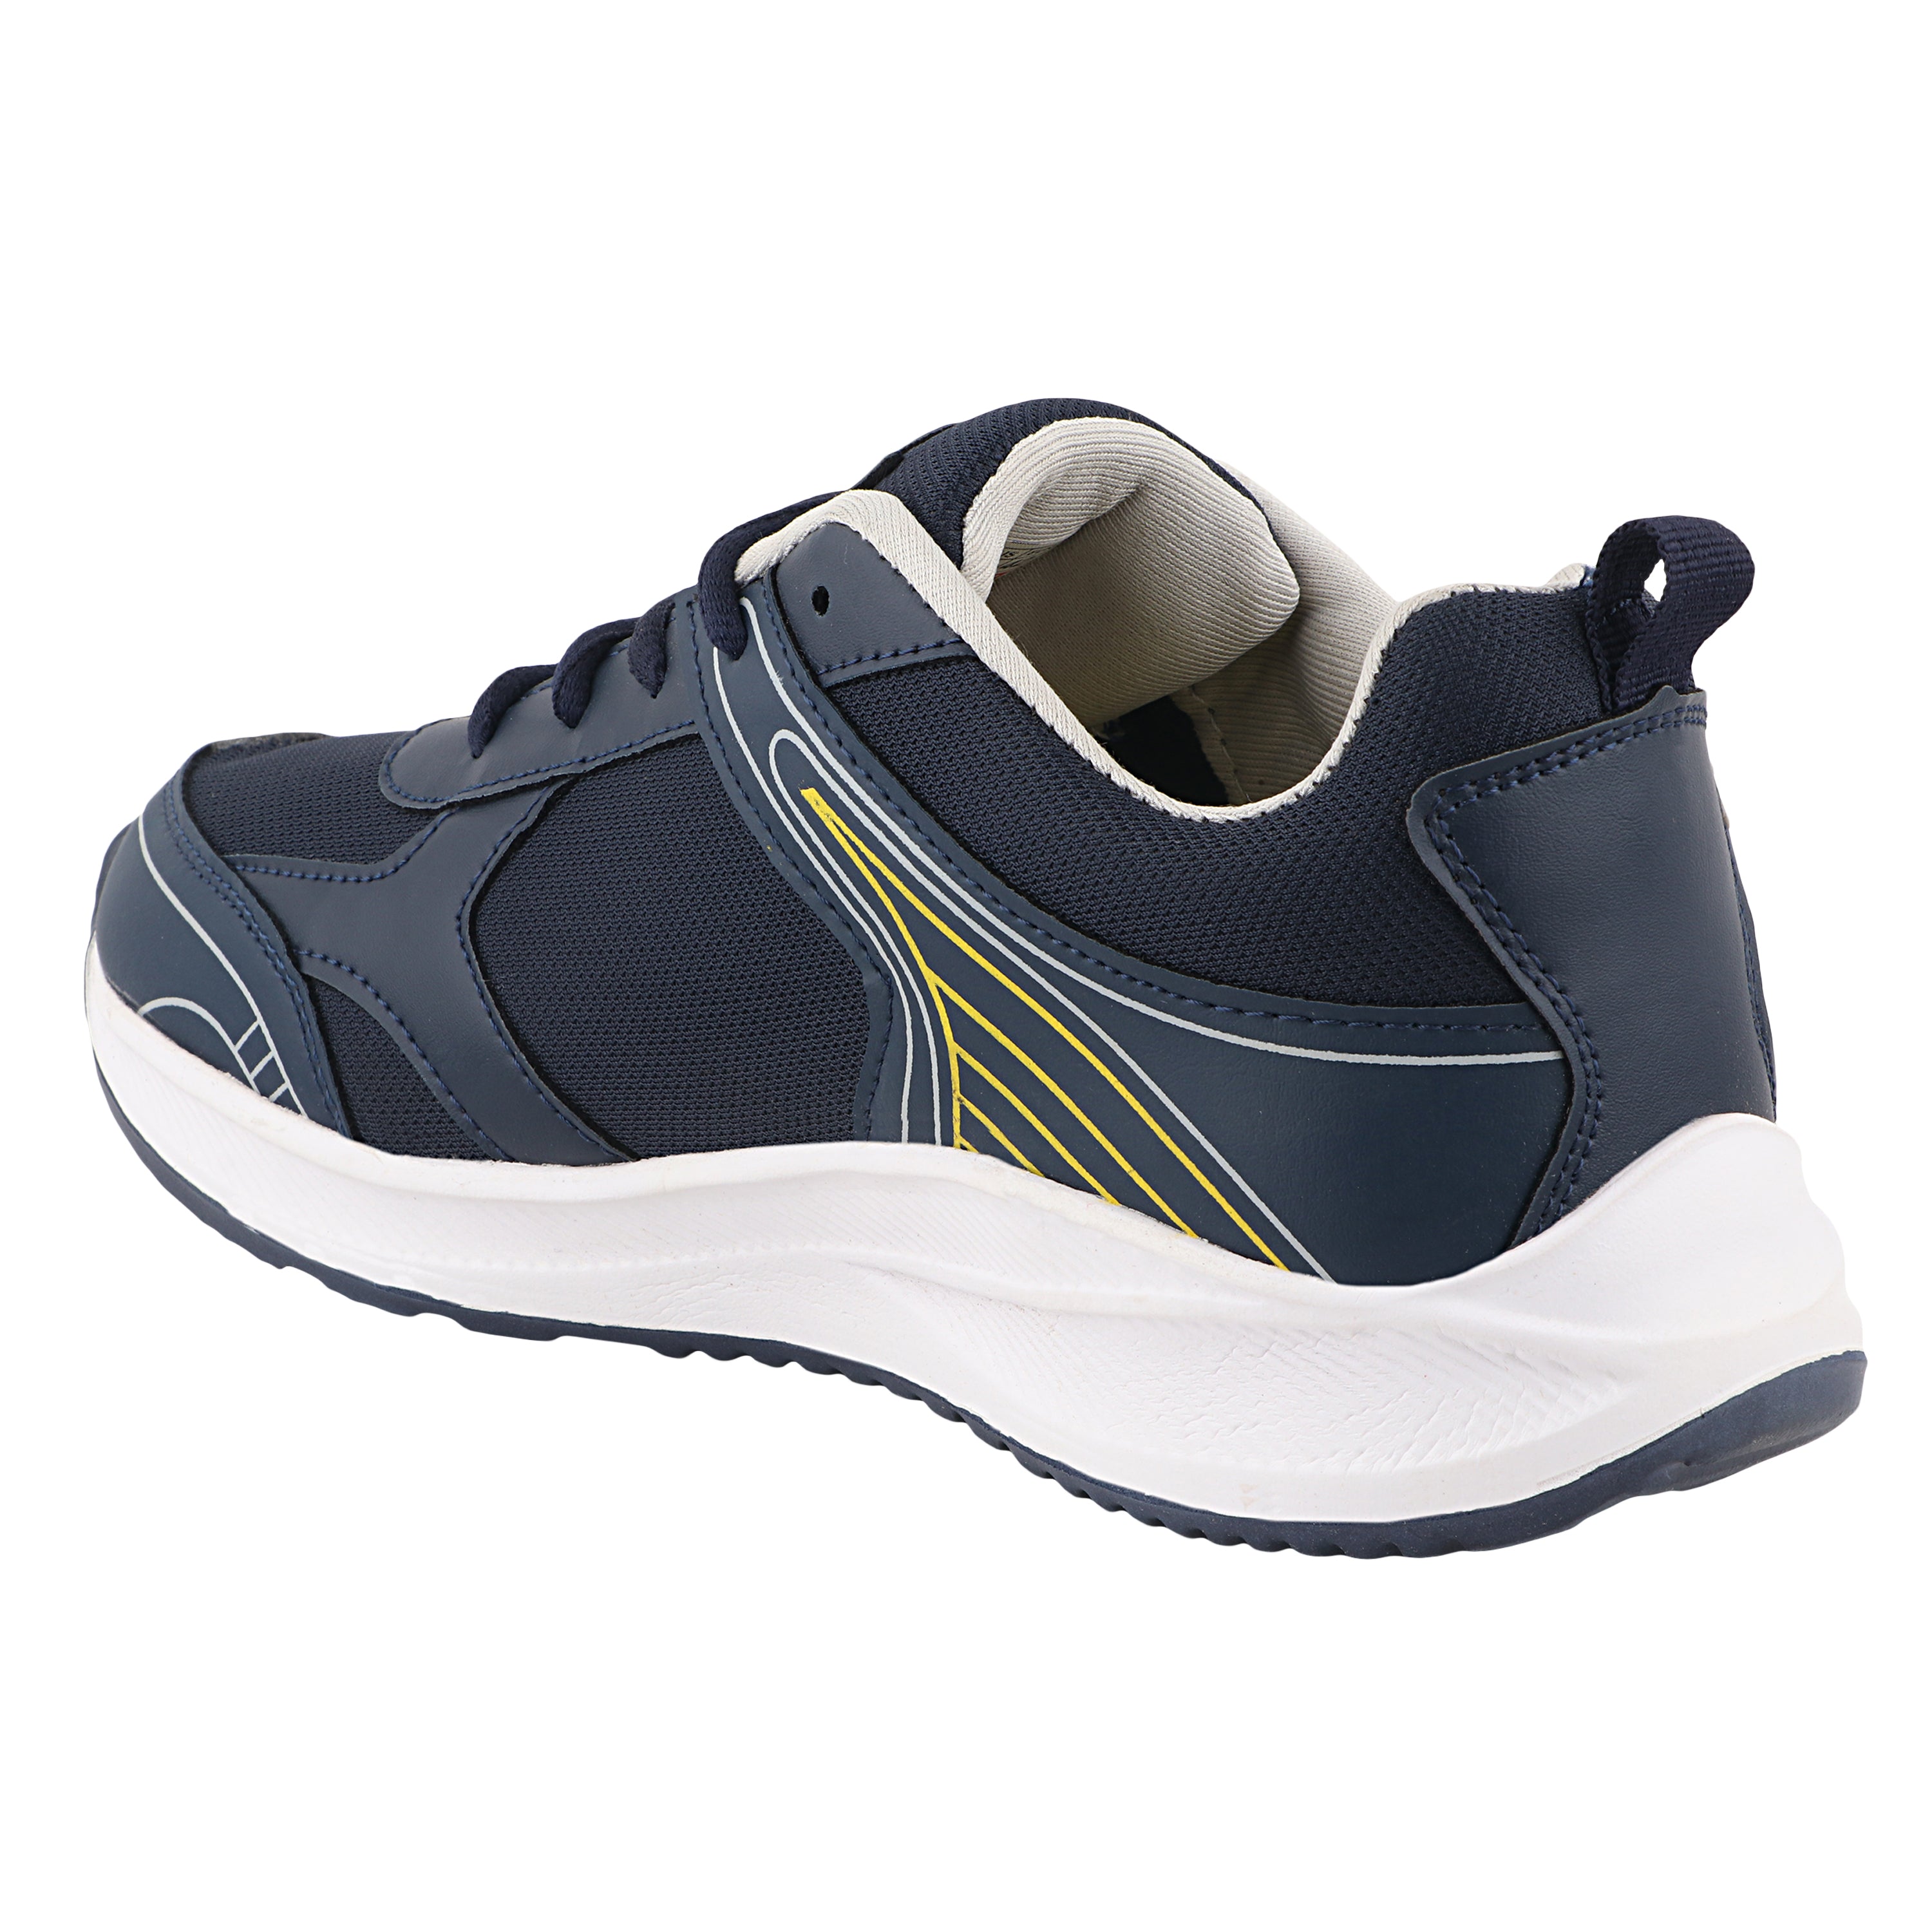 Carter casual shoes blue